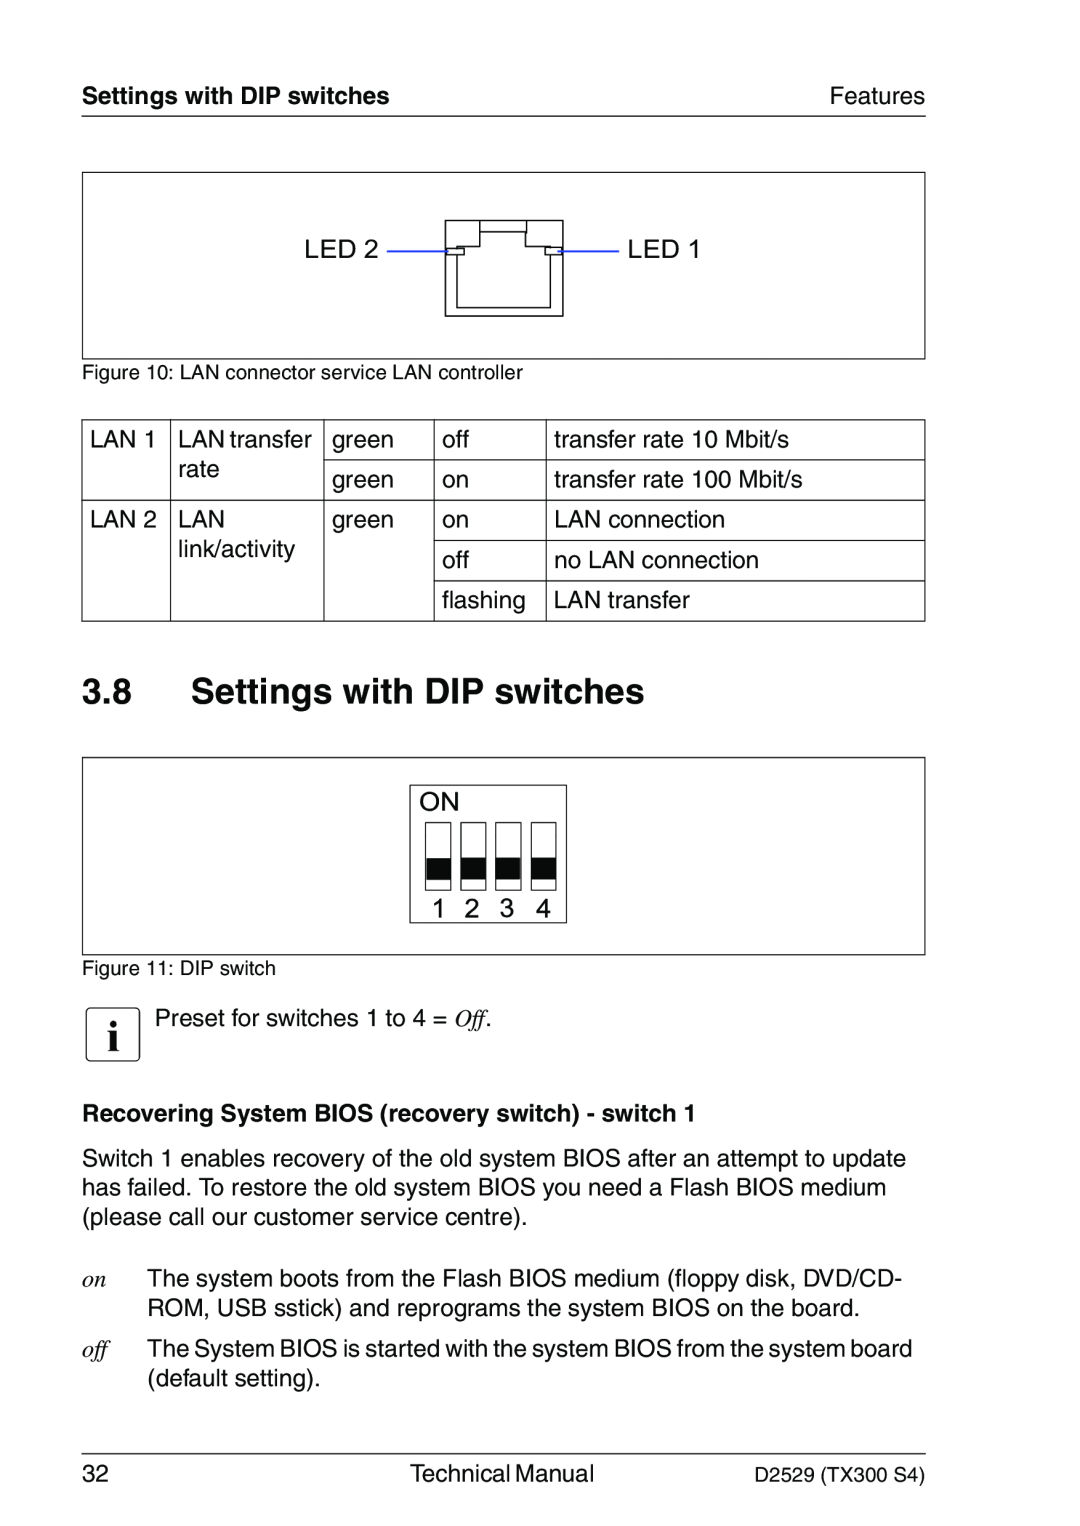 Fujitsu D2529 technical manual Settings with DIP switches, Recovering System BIOS recovery switch - switch 